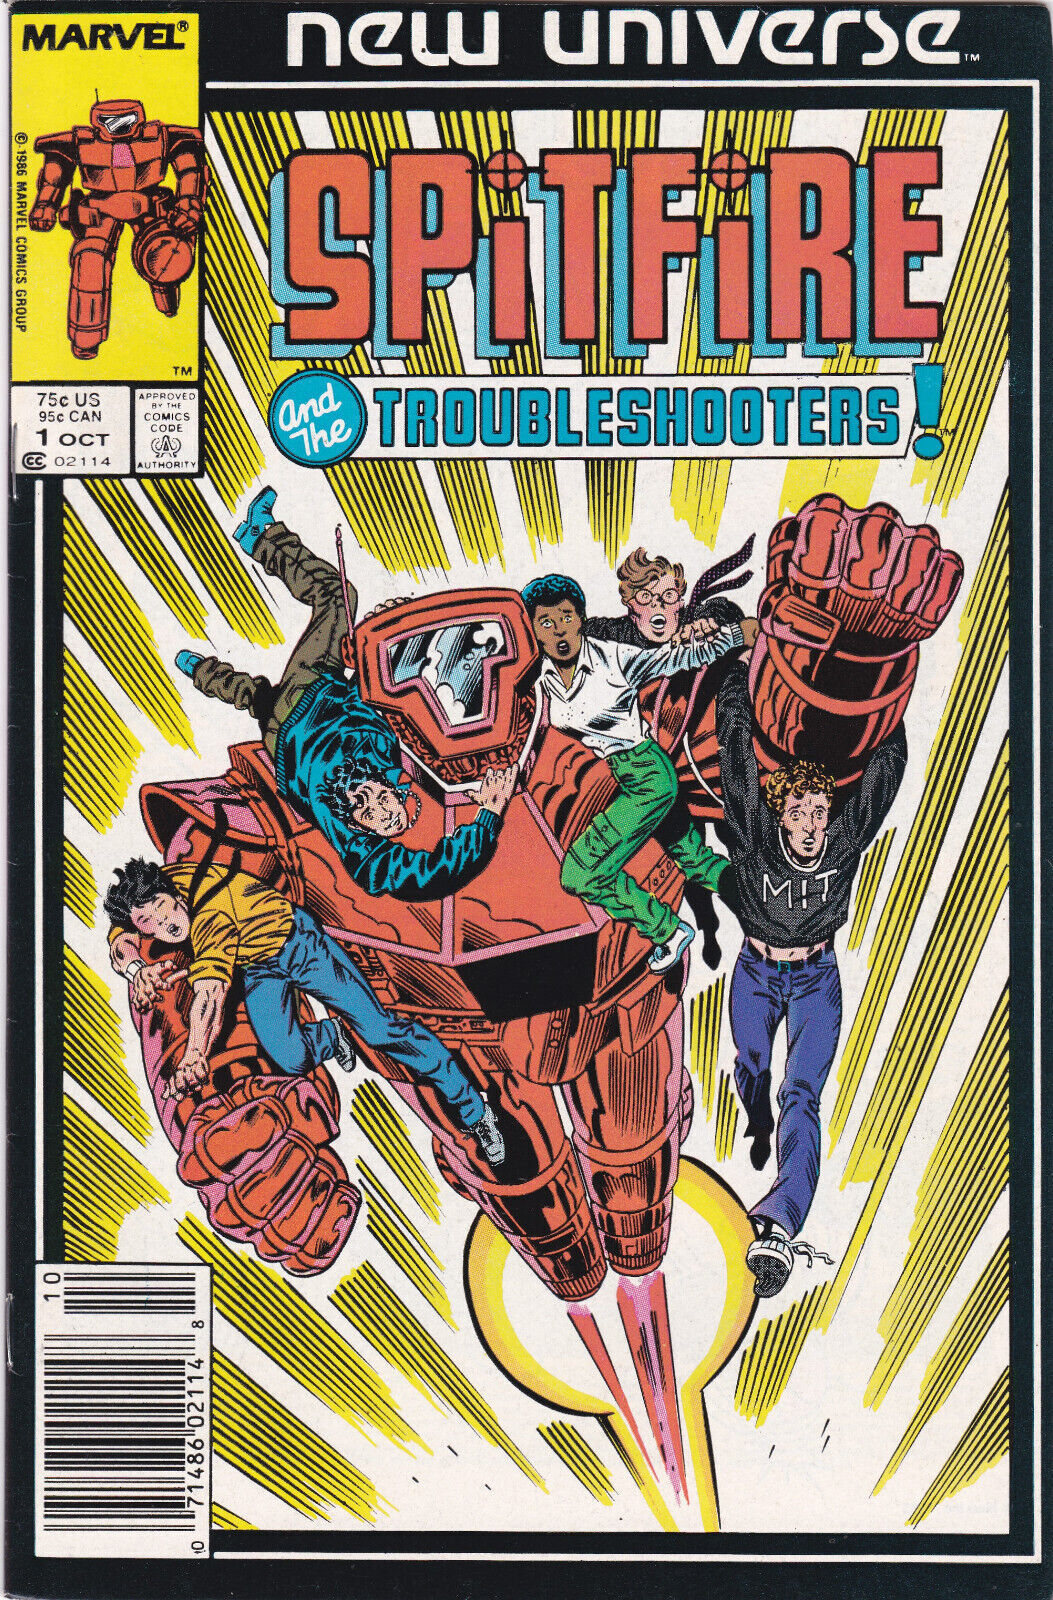 Spitfire Issue 1 Marvel Comic Book BAGGED AND BOARDED, Newsstand